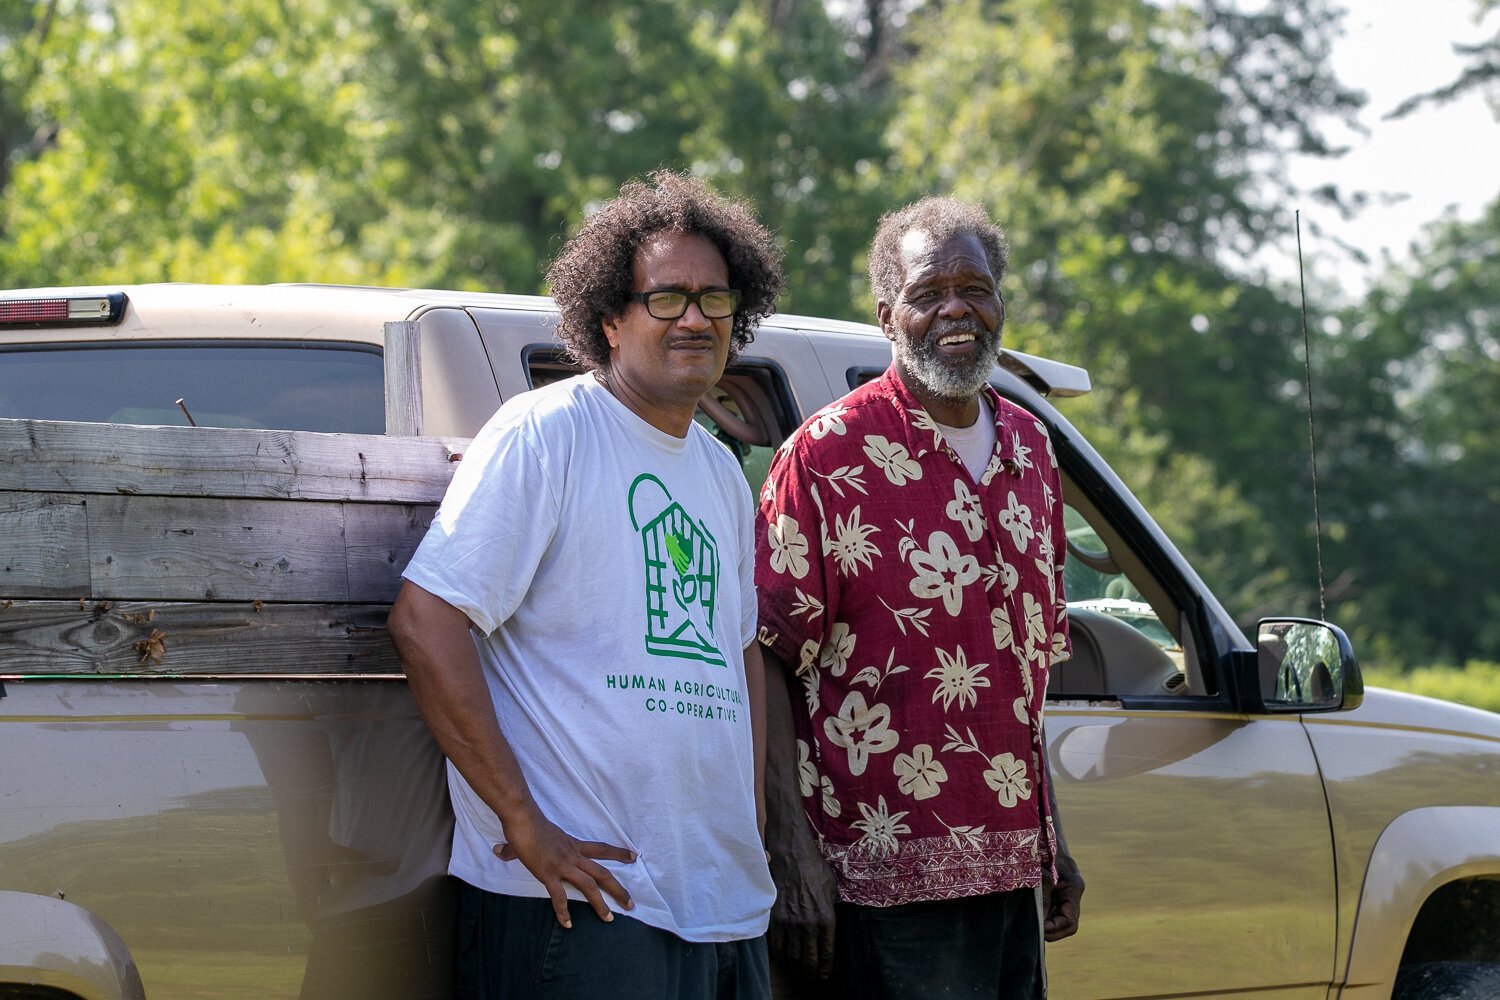 Ty Simmons, left, of the Human Agricultural Cooperative and Ephraim Smiley, right, of Smiley’s Garden Angels tend the community urban farm at 2512 E. Tillman Rd.